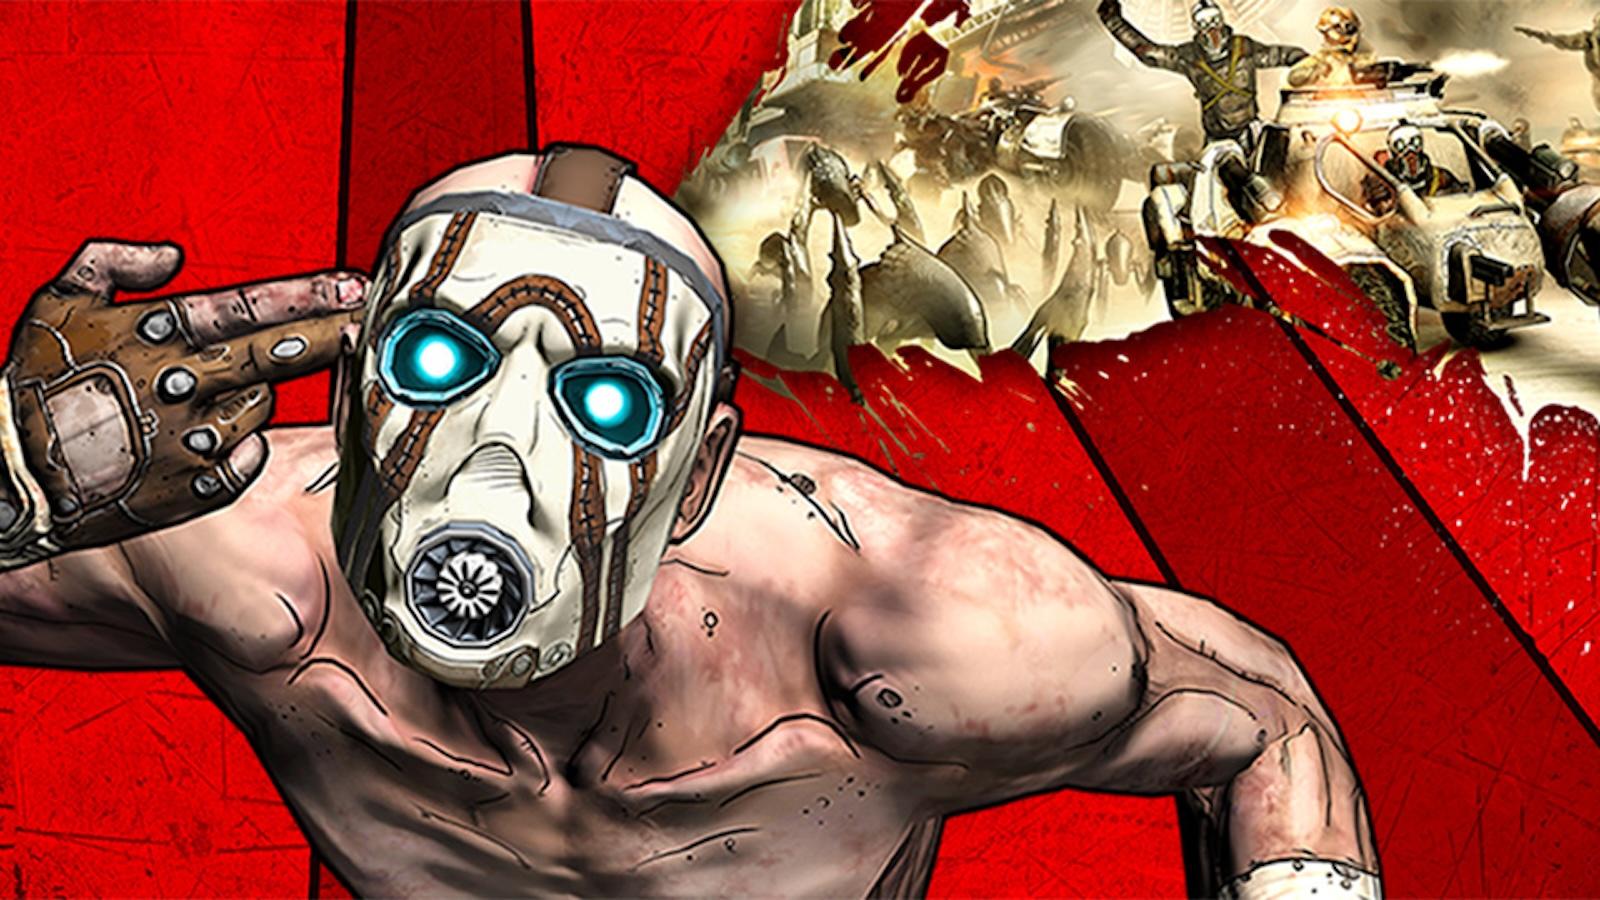 Poster for the Borderlands game